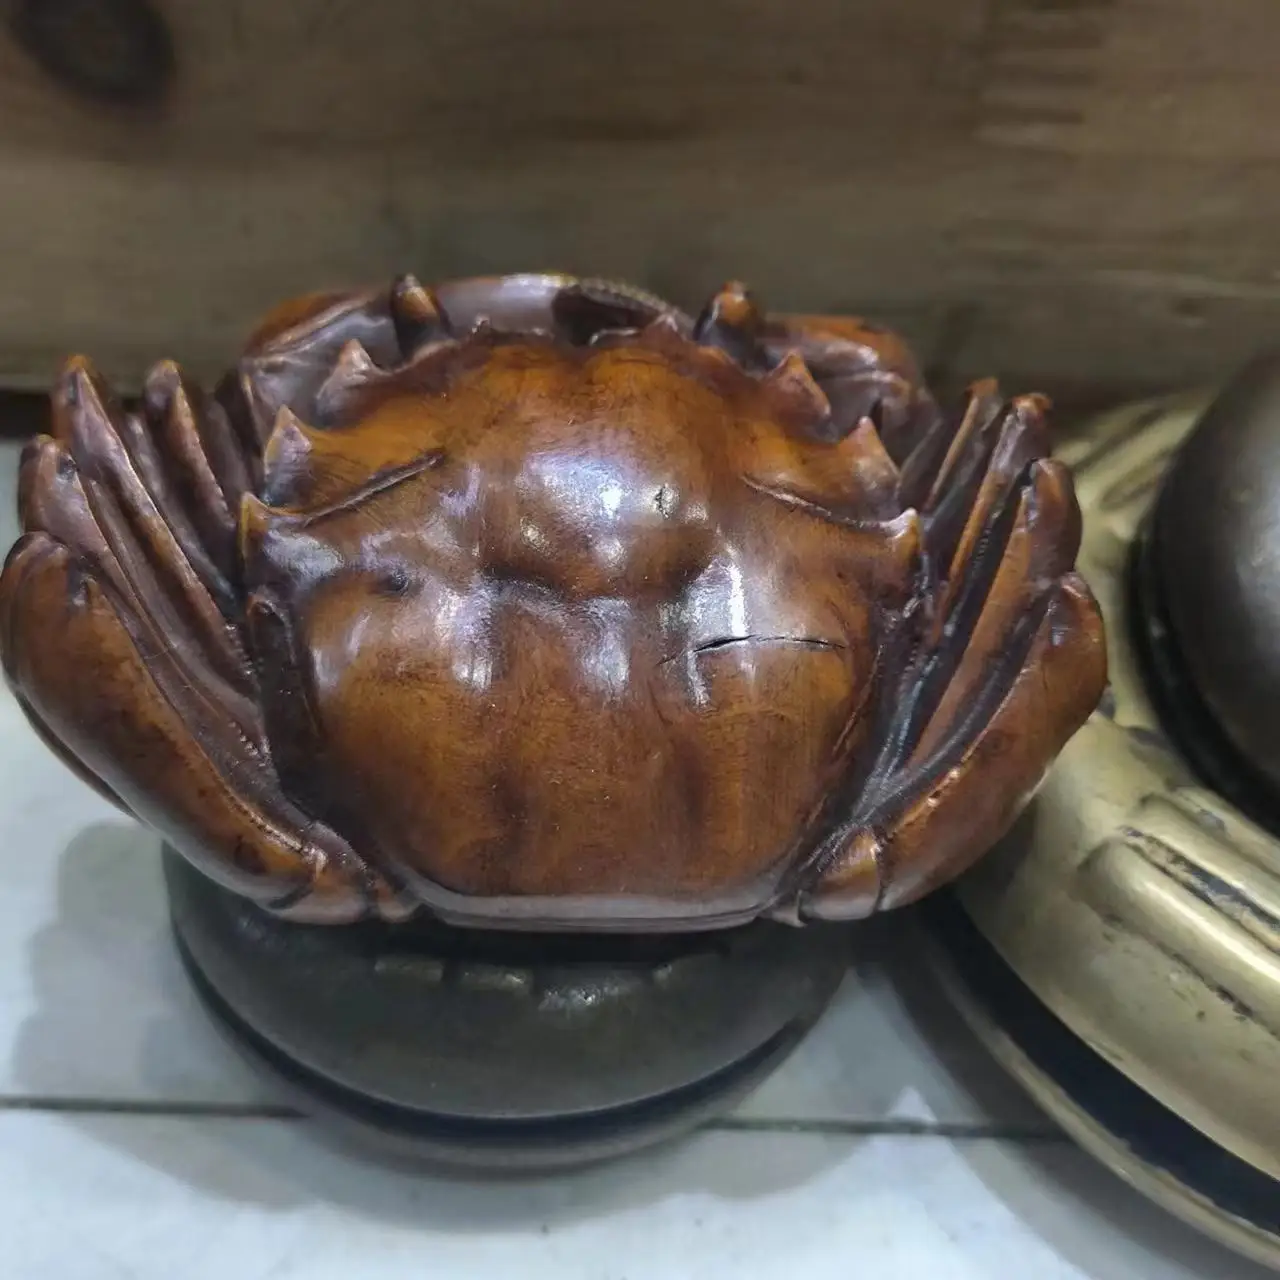 1pcs/lot boxwood carved crab ornament Good meaning Solid wood handicraft Tea pets Collectible Superb craftsmanship Animal shape hitman anders and the meaning of it all